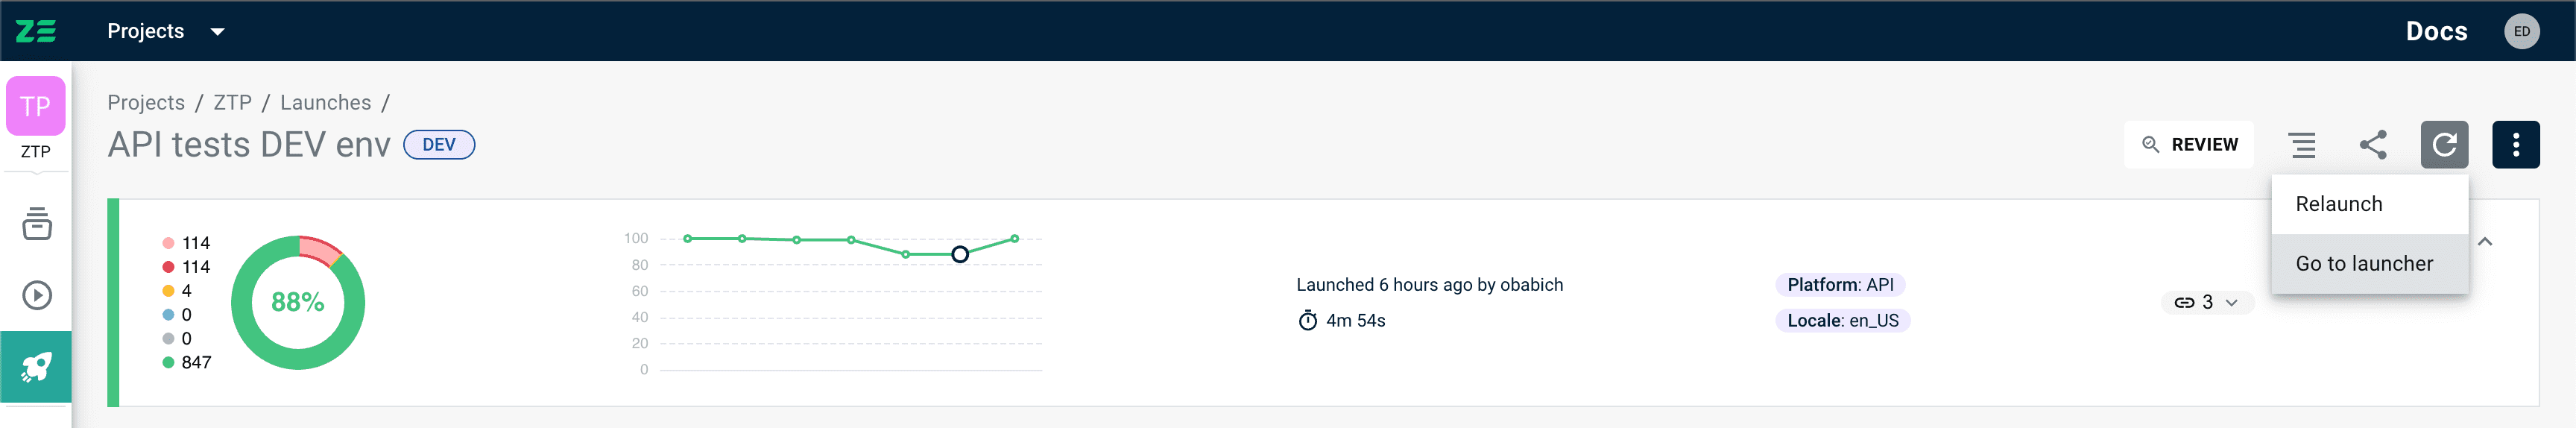 Go to launcher from automation launch view